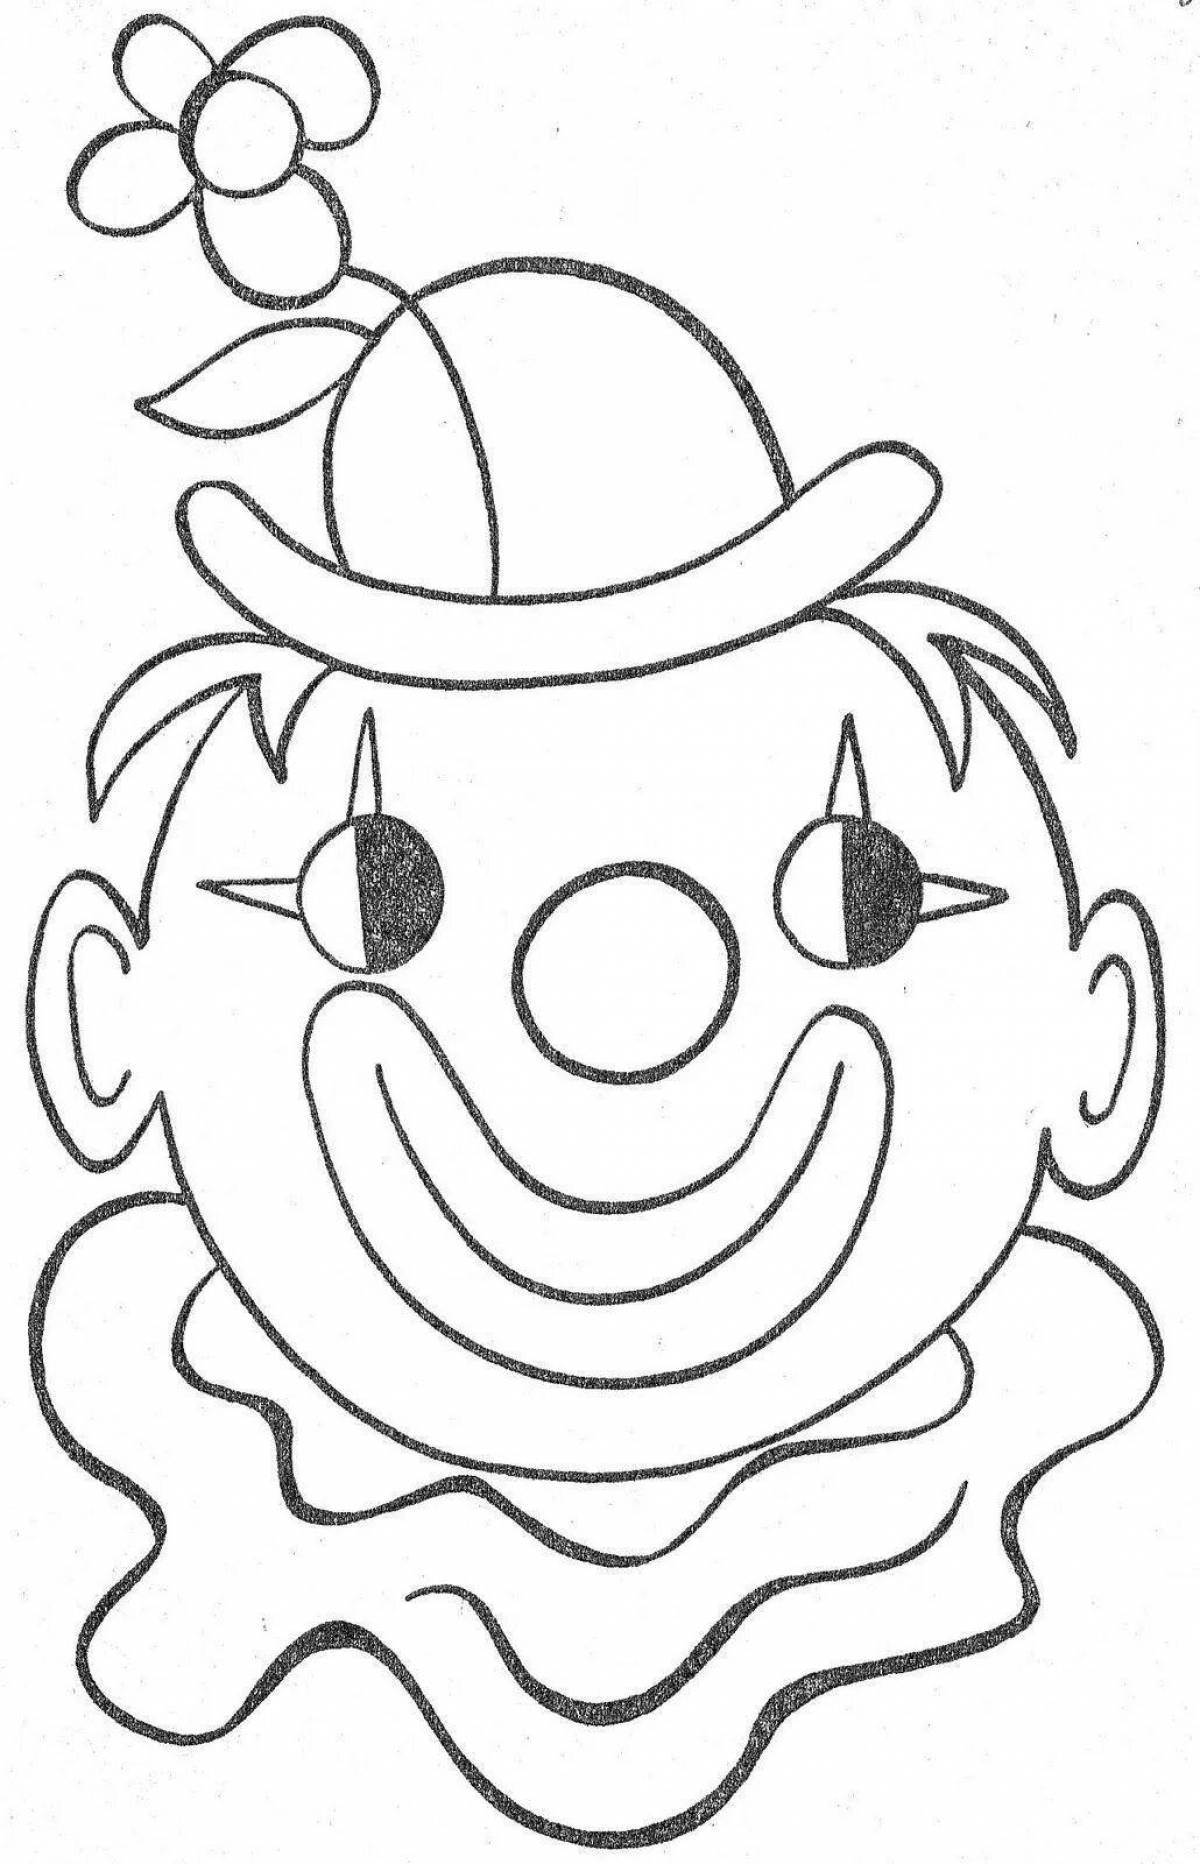 Joyful clown face coloring page for kids